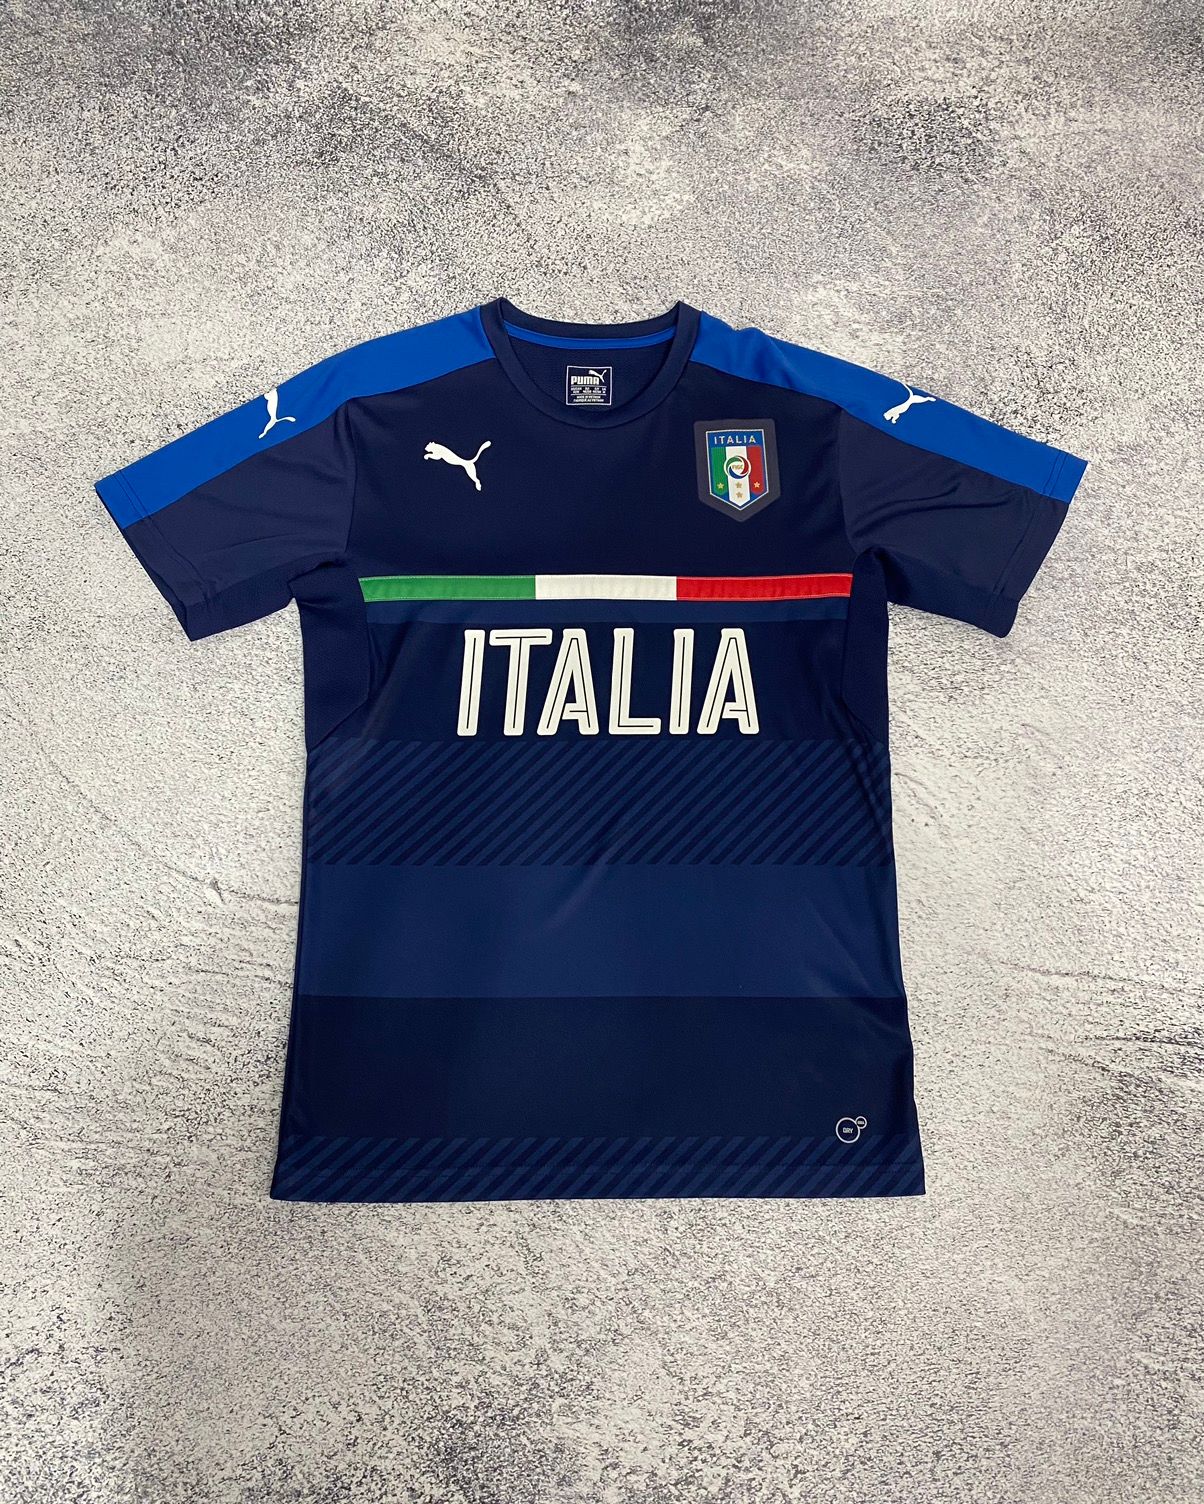 Pre-owned Puma X Soccer Jersey Puma Italy 2016 2017 Training Football Shirt Soccer Jersey In Blue